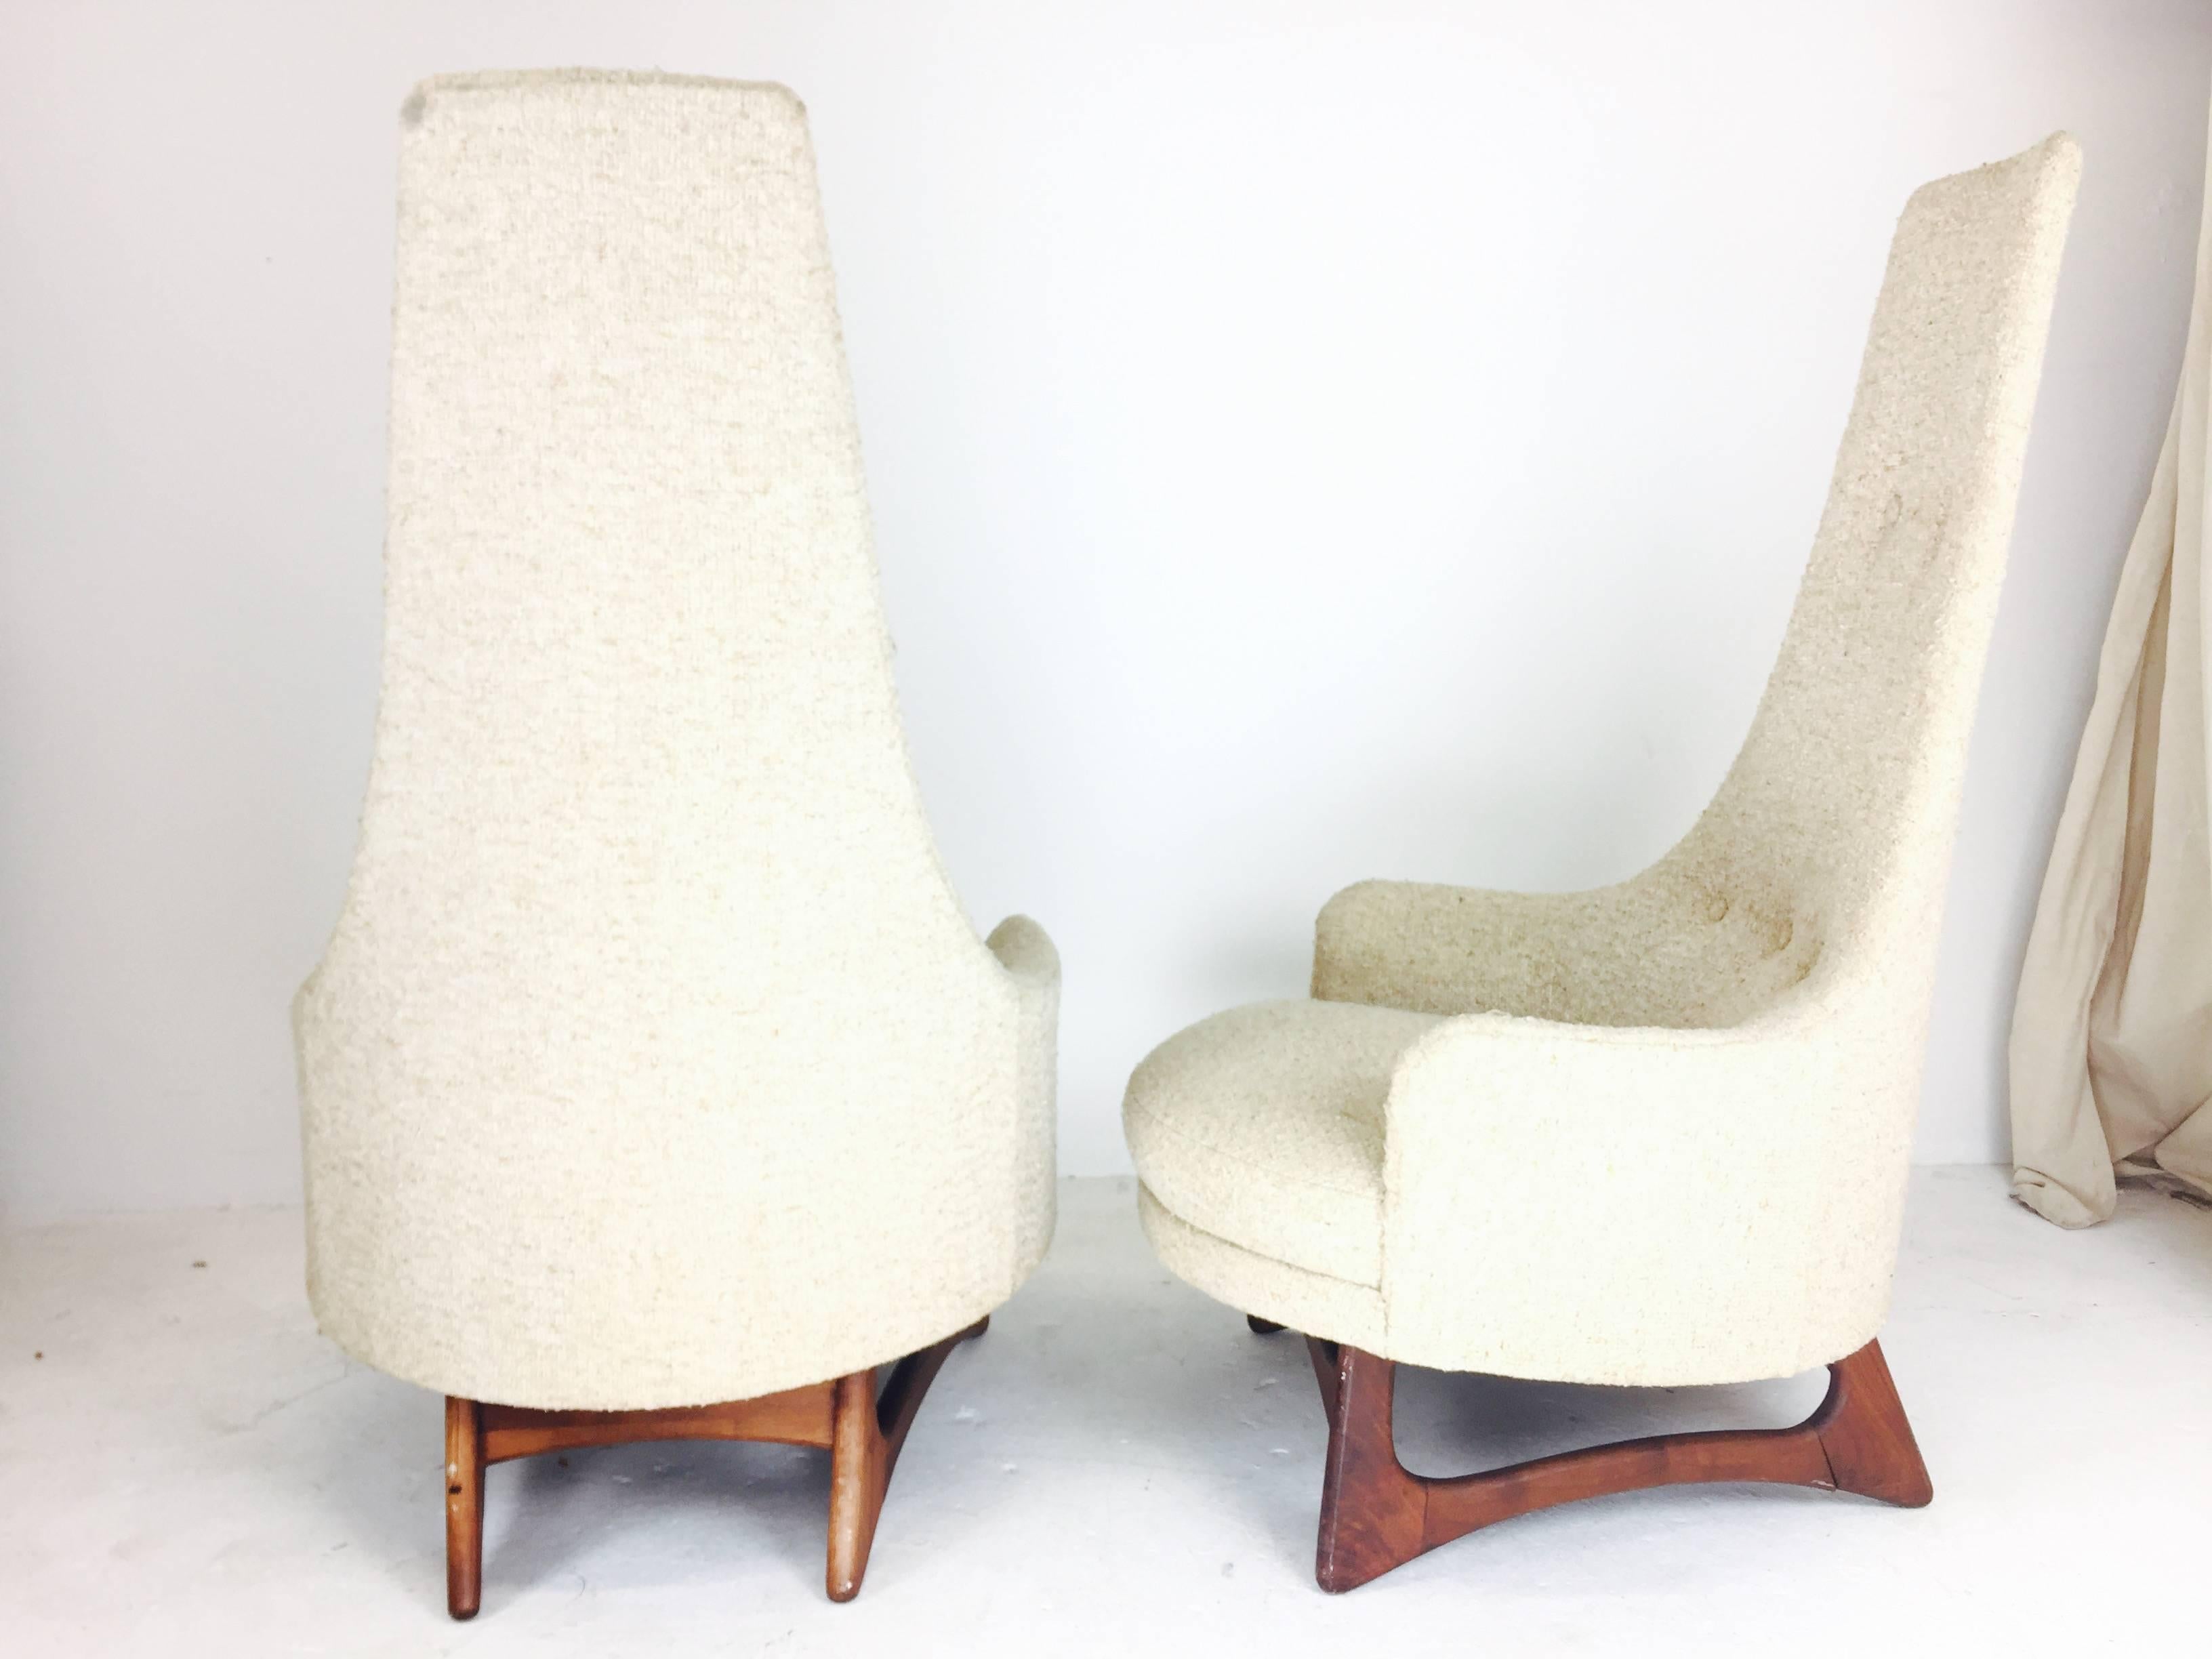 Pair of Tall Back Adrian Pearsall Armchairs for Craft Associates 1